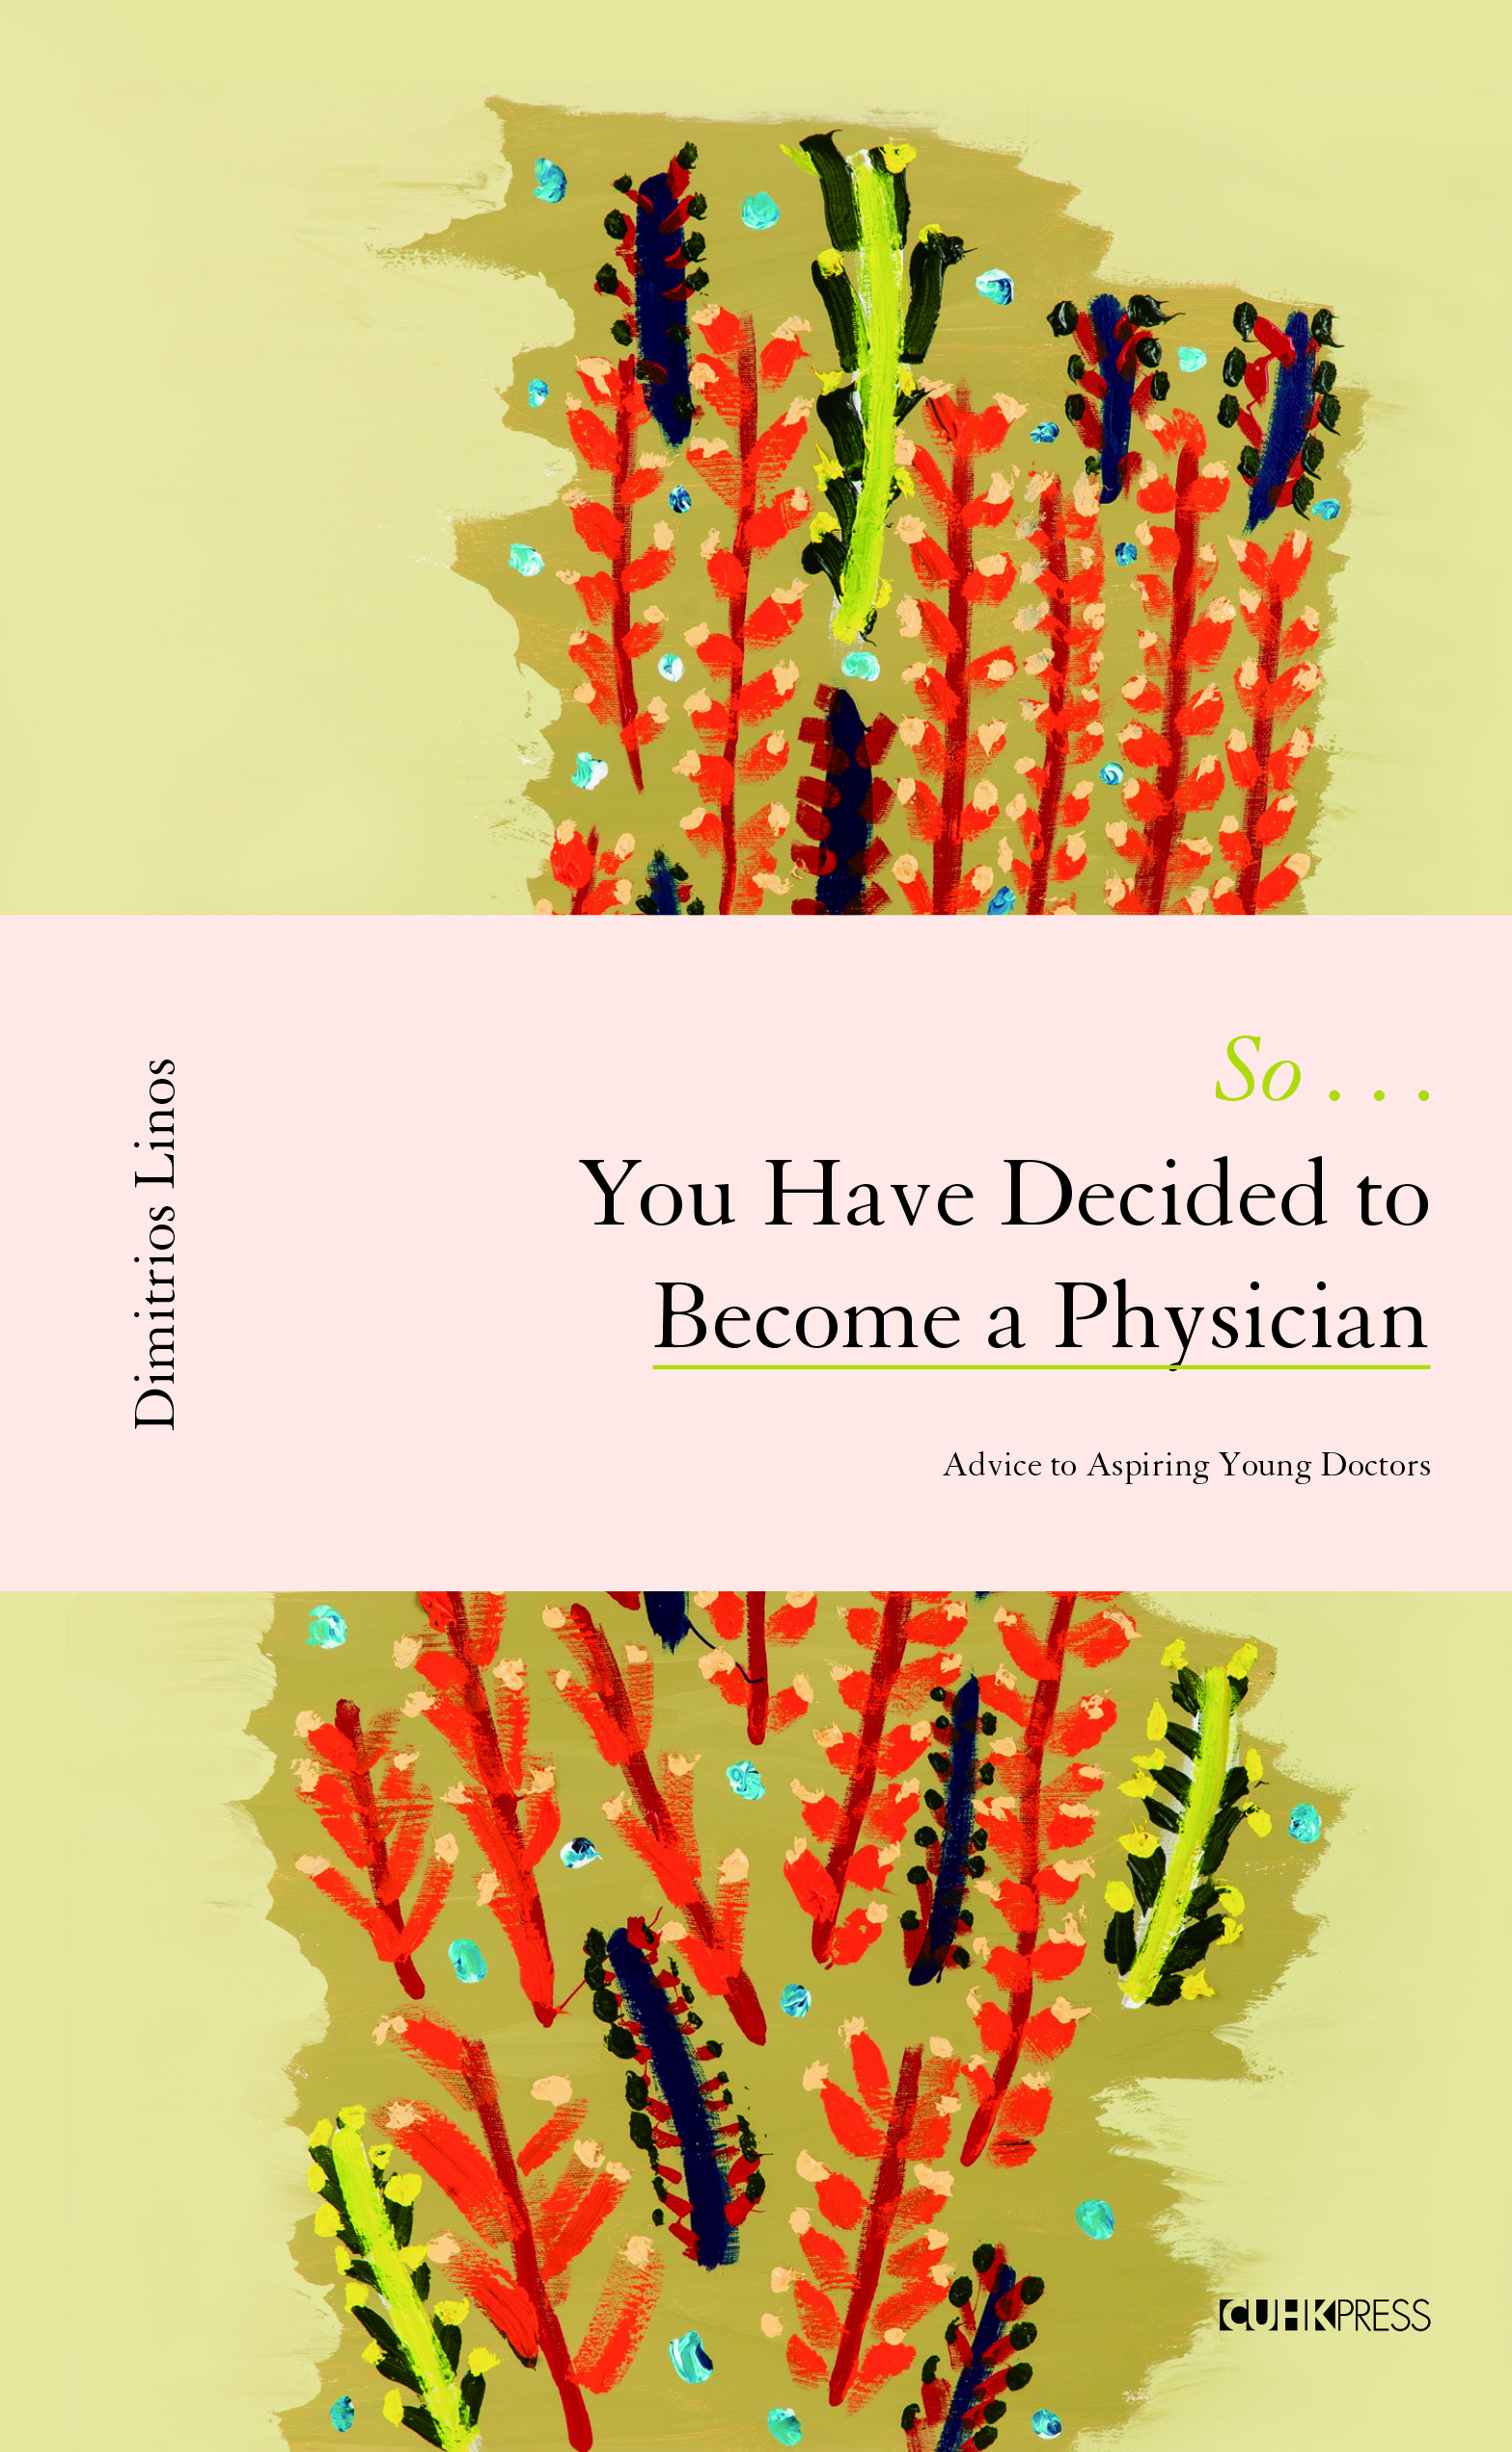 So... You Have Decided to Become a Physician: Advice to Aspiring Young Doctors